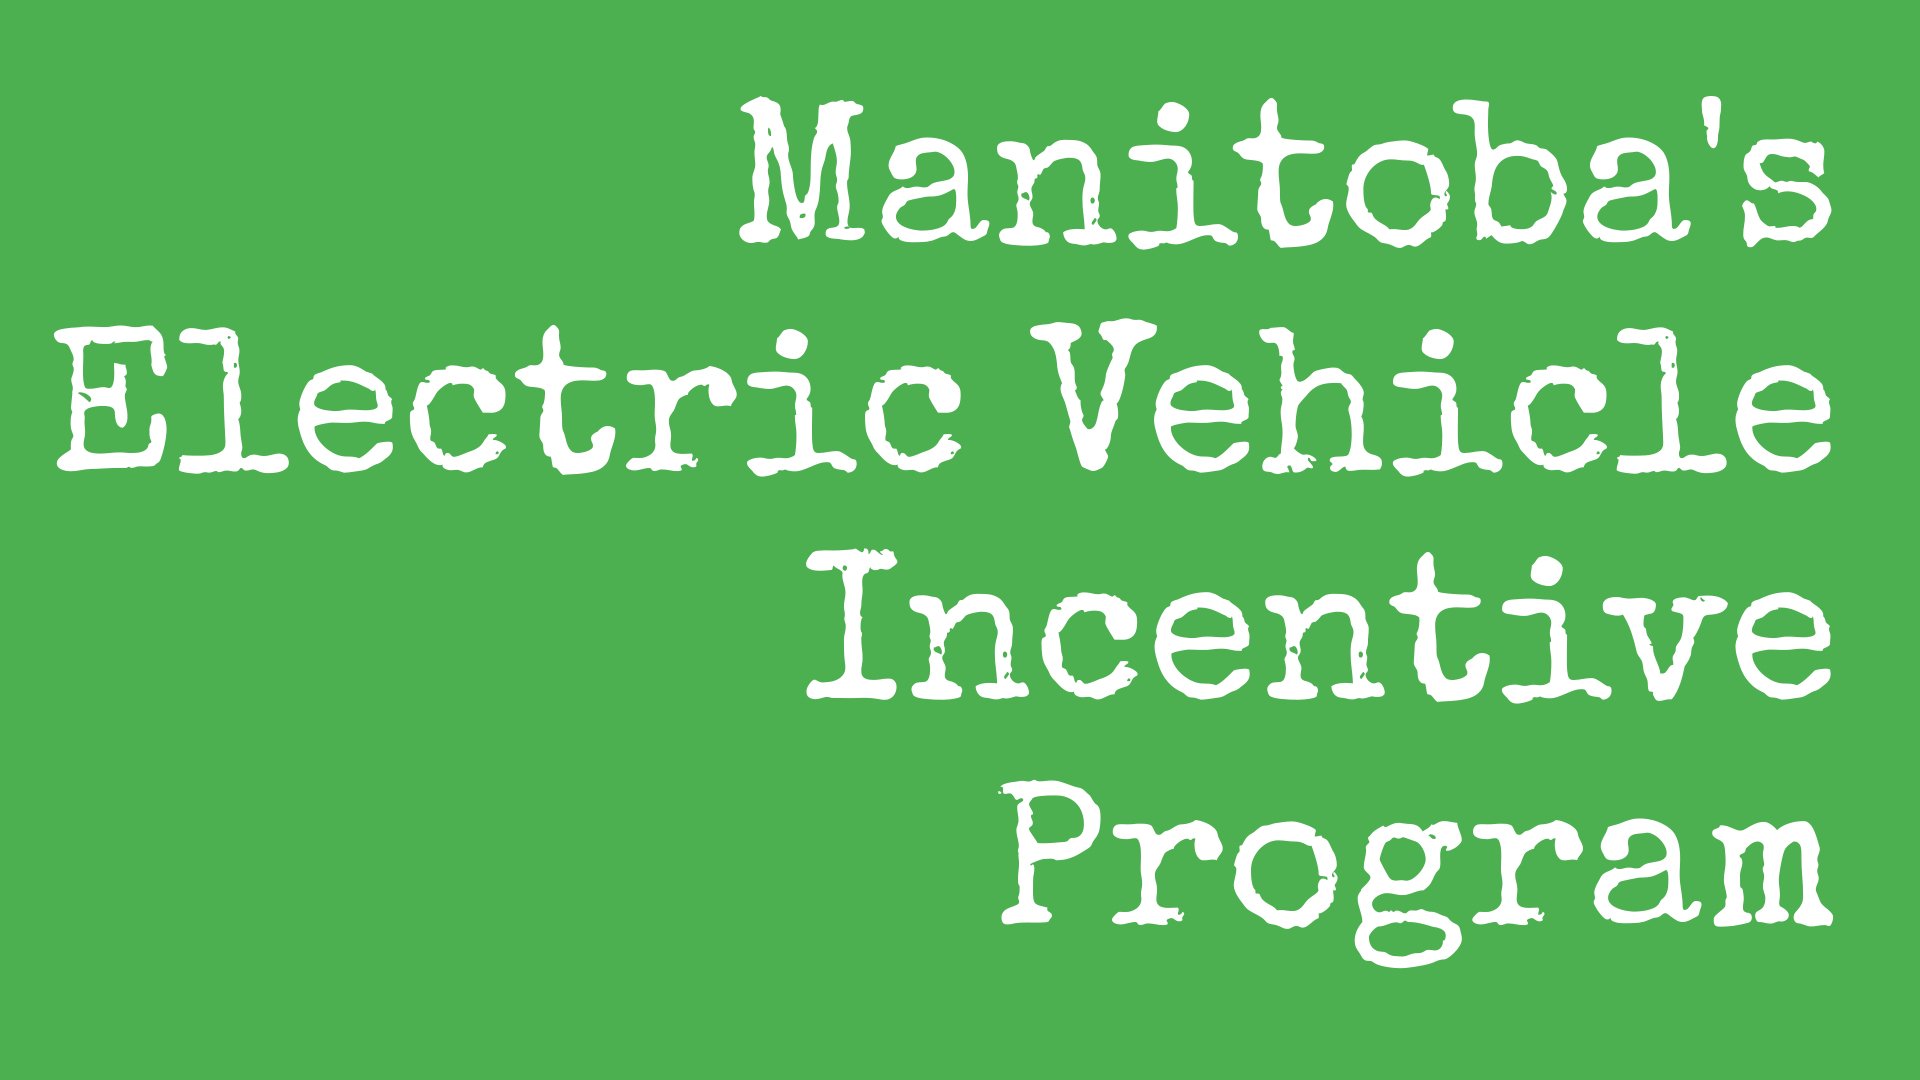 Banner with the text 'Electric Vehicle Incentive Program' in bold white letters on a green background.